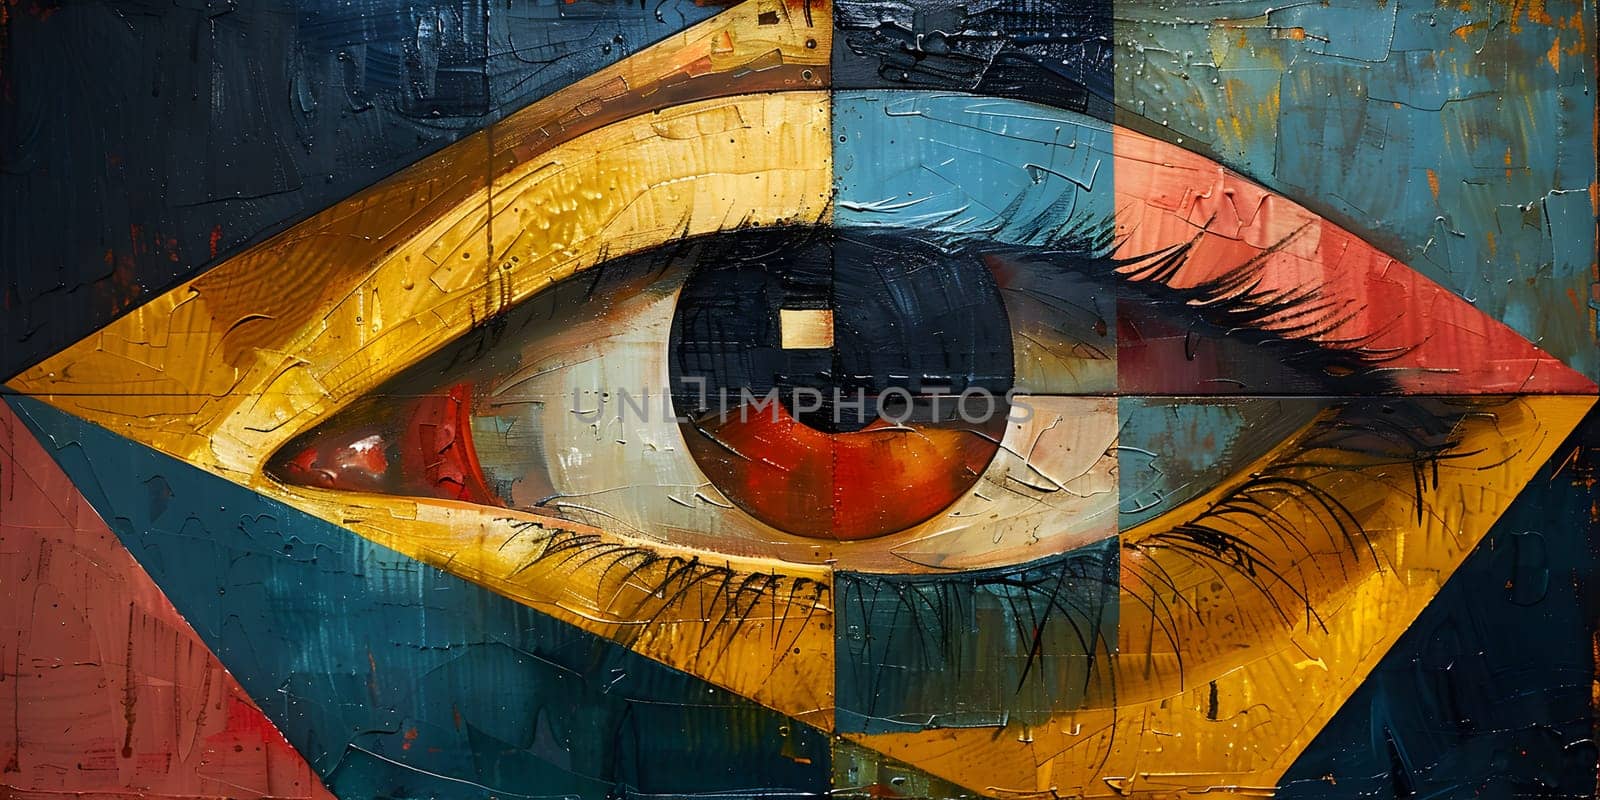 A vibrant painting of an eye with a square in the middle, featuring eyelash, iris, and bird details. This graffiti art piece embodies a unique pattern and colorful visual arts